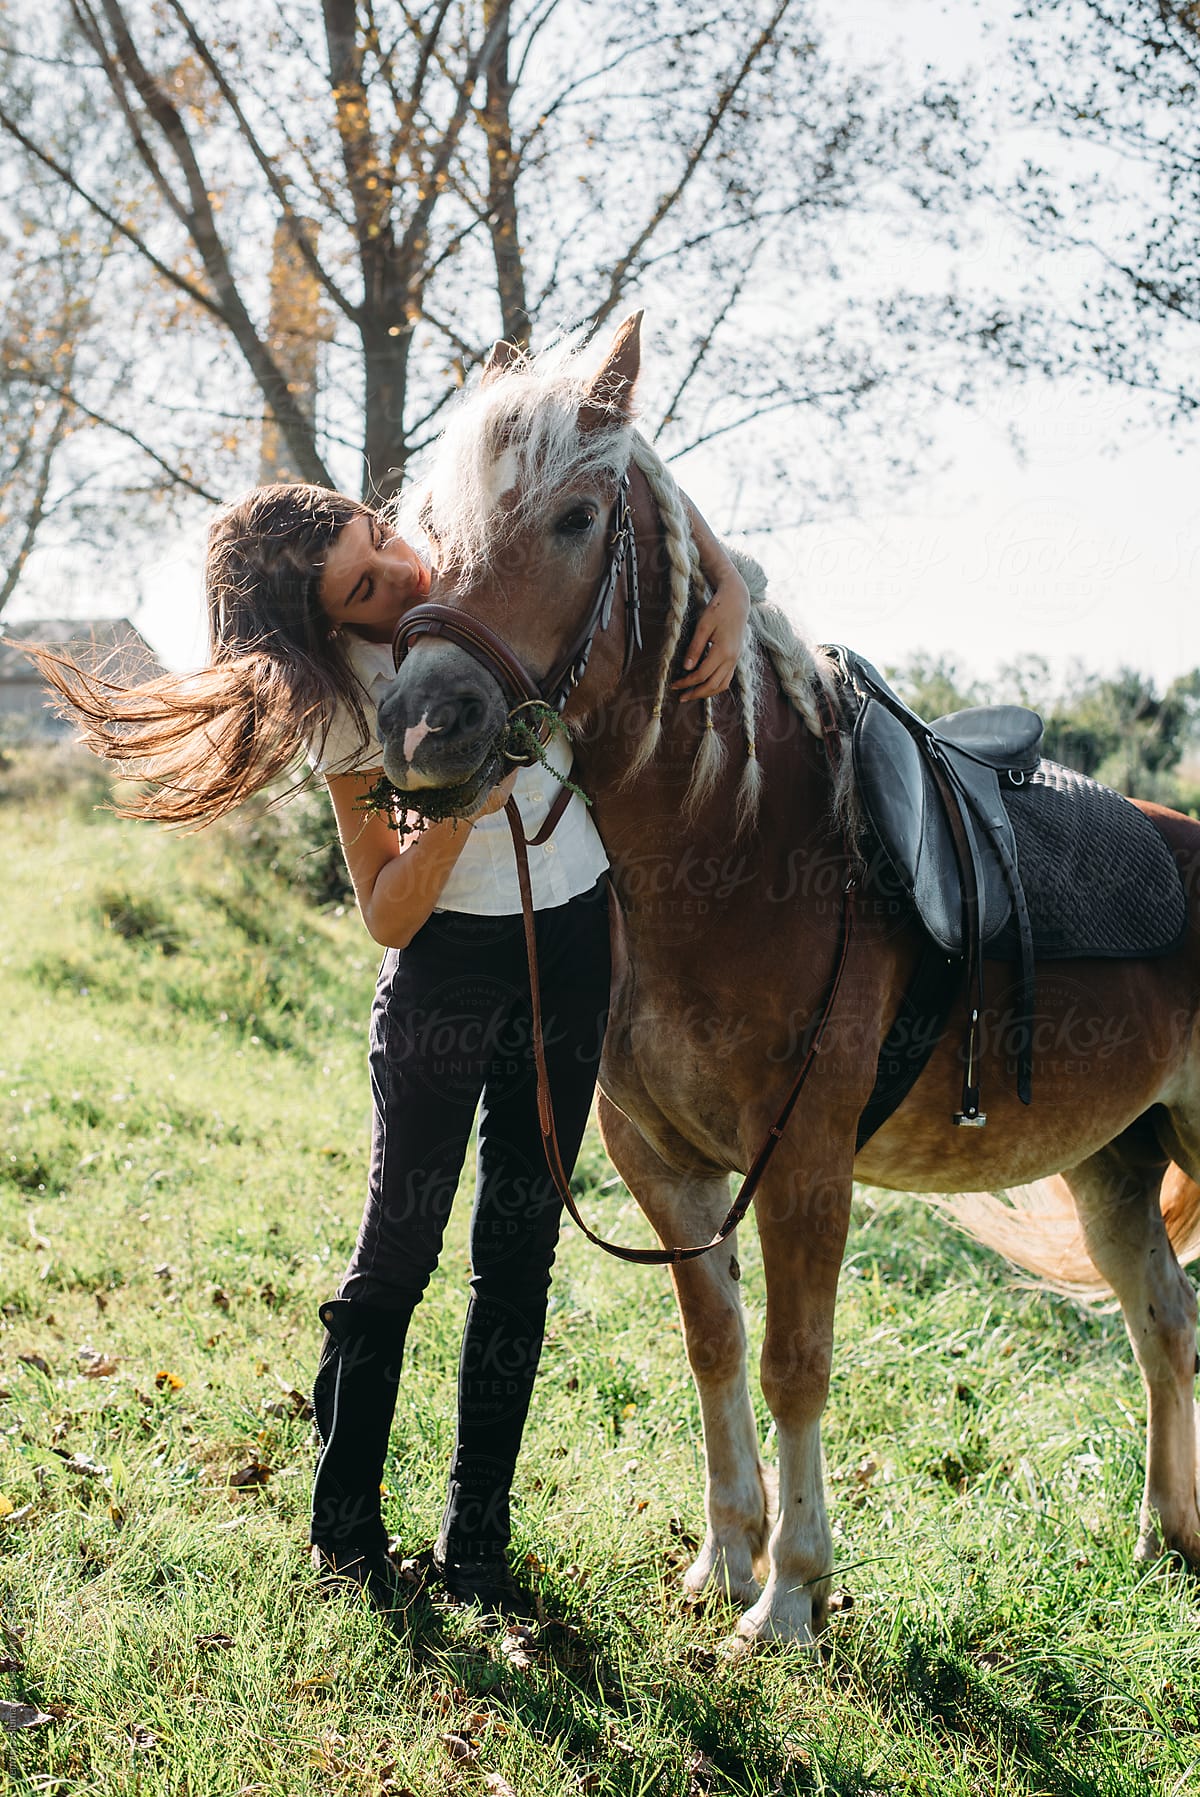 Teenage Girl Giving a Kiss to Her Horse